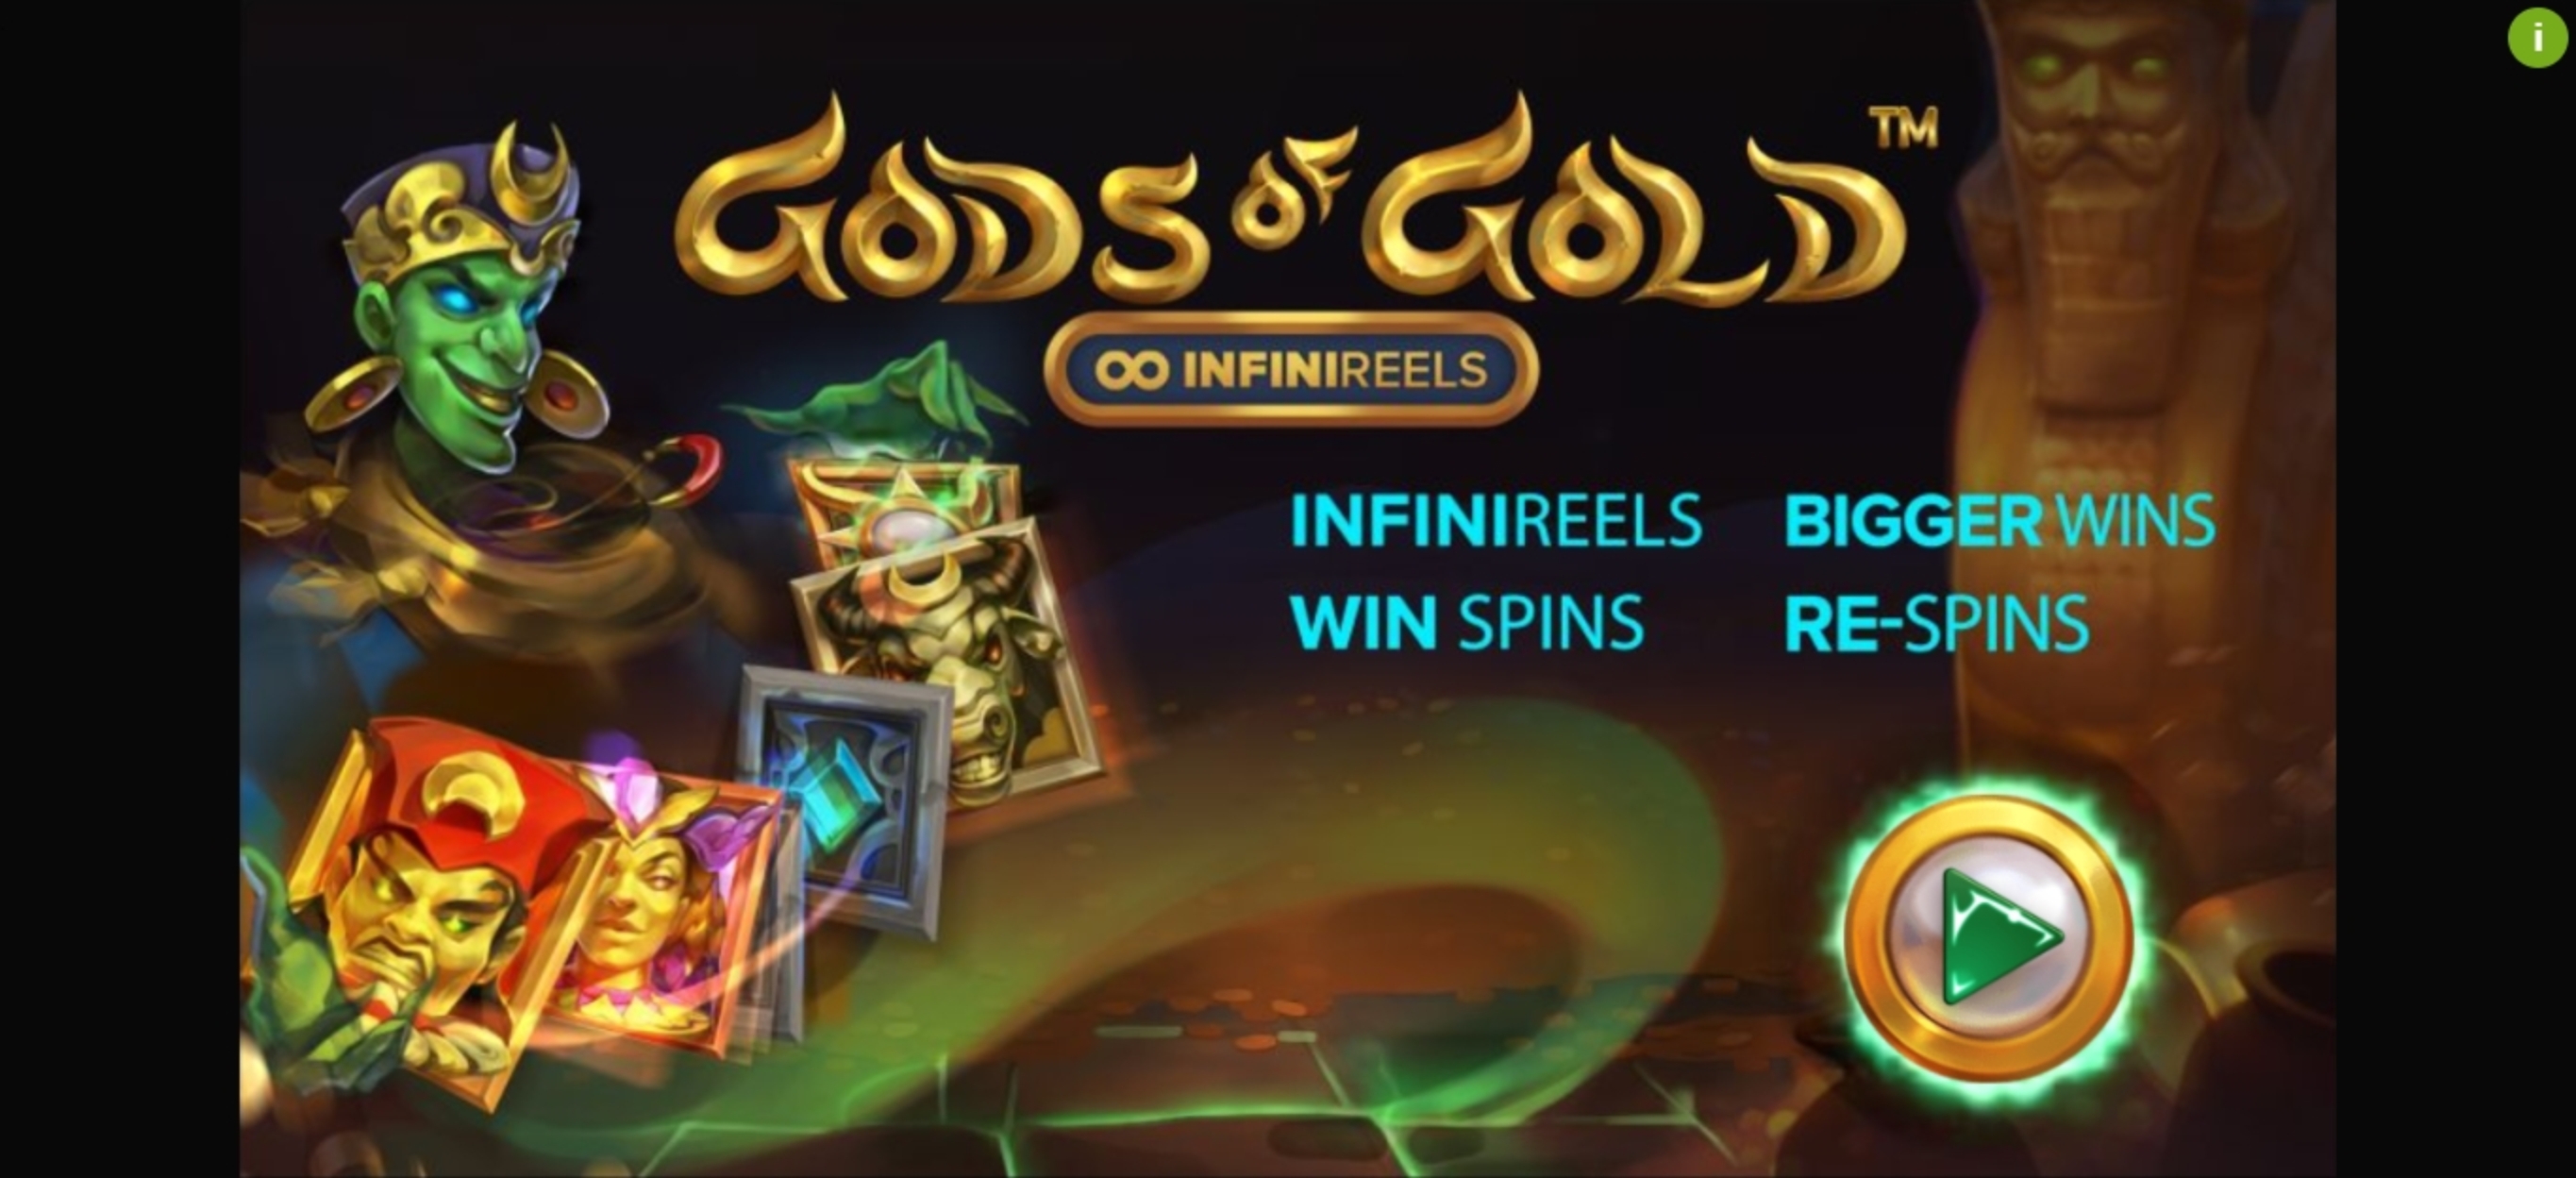 Play Gods of Gold Infinireels Free Casino Slot Game by NetEnt